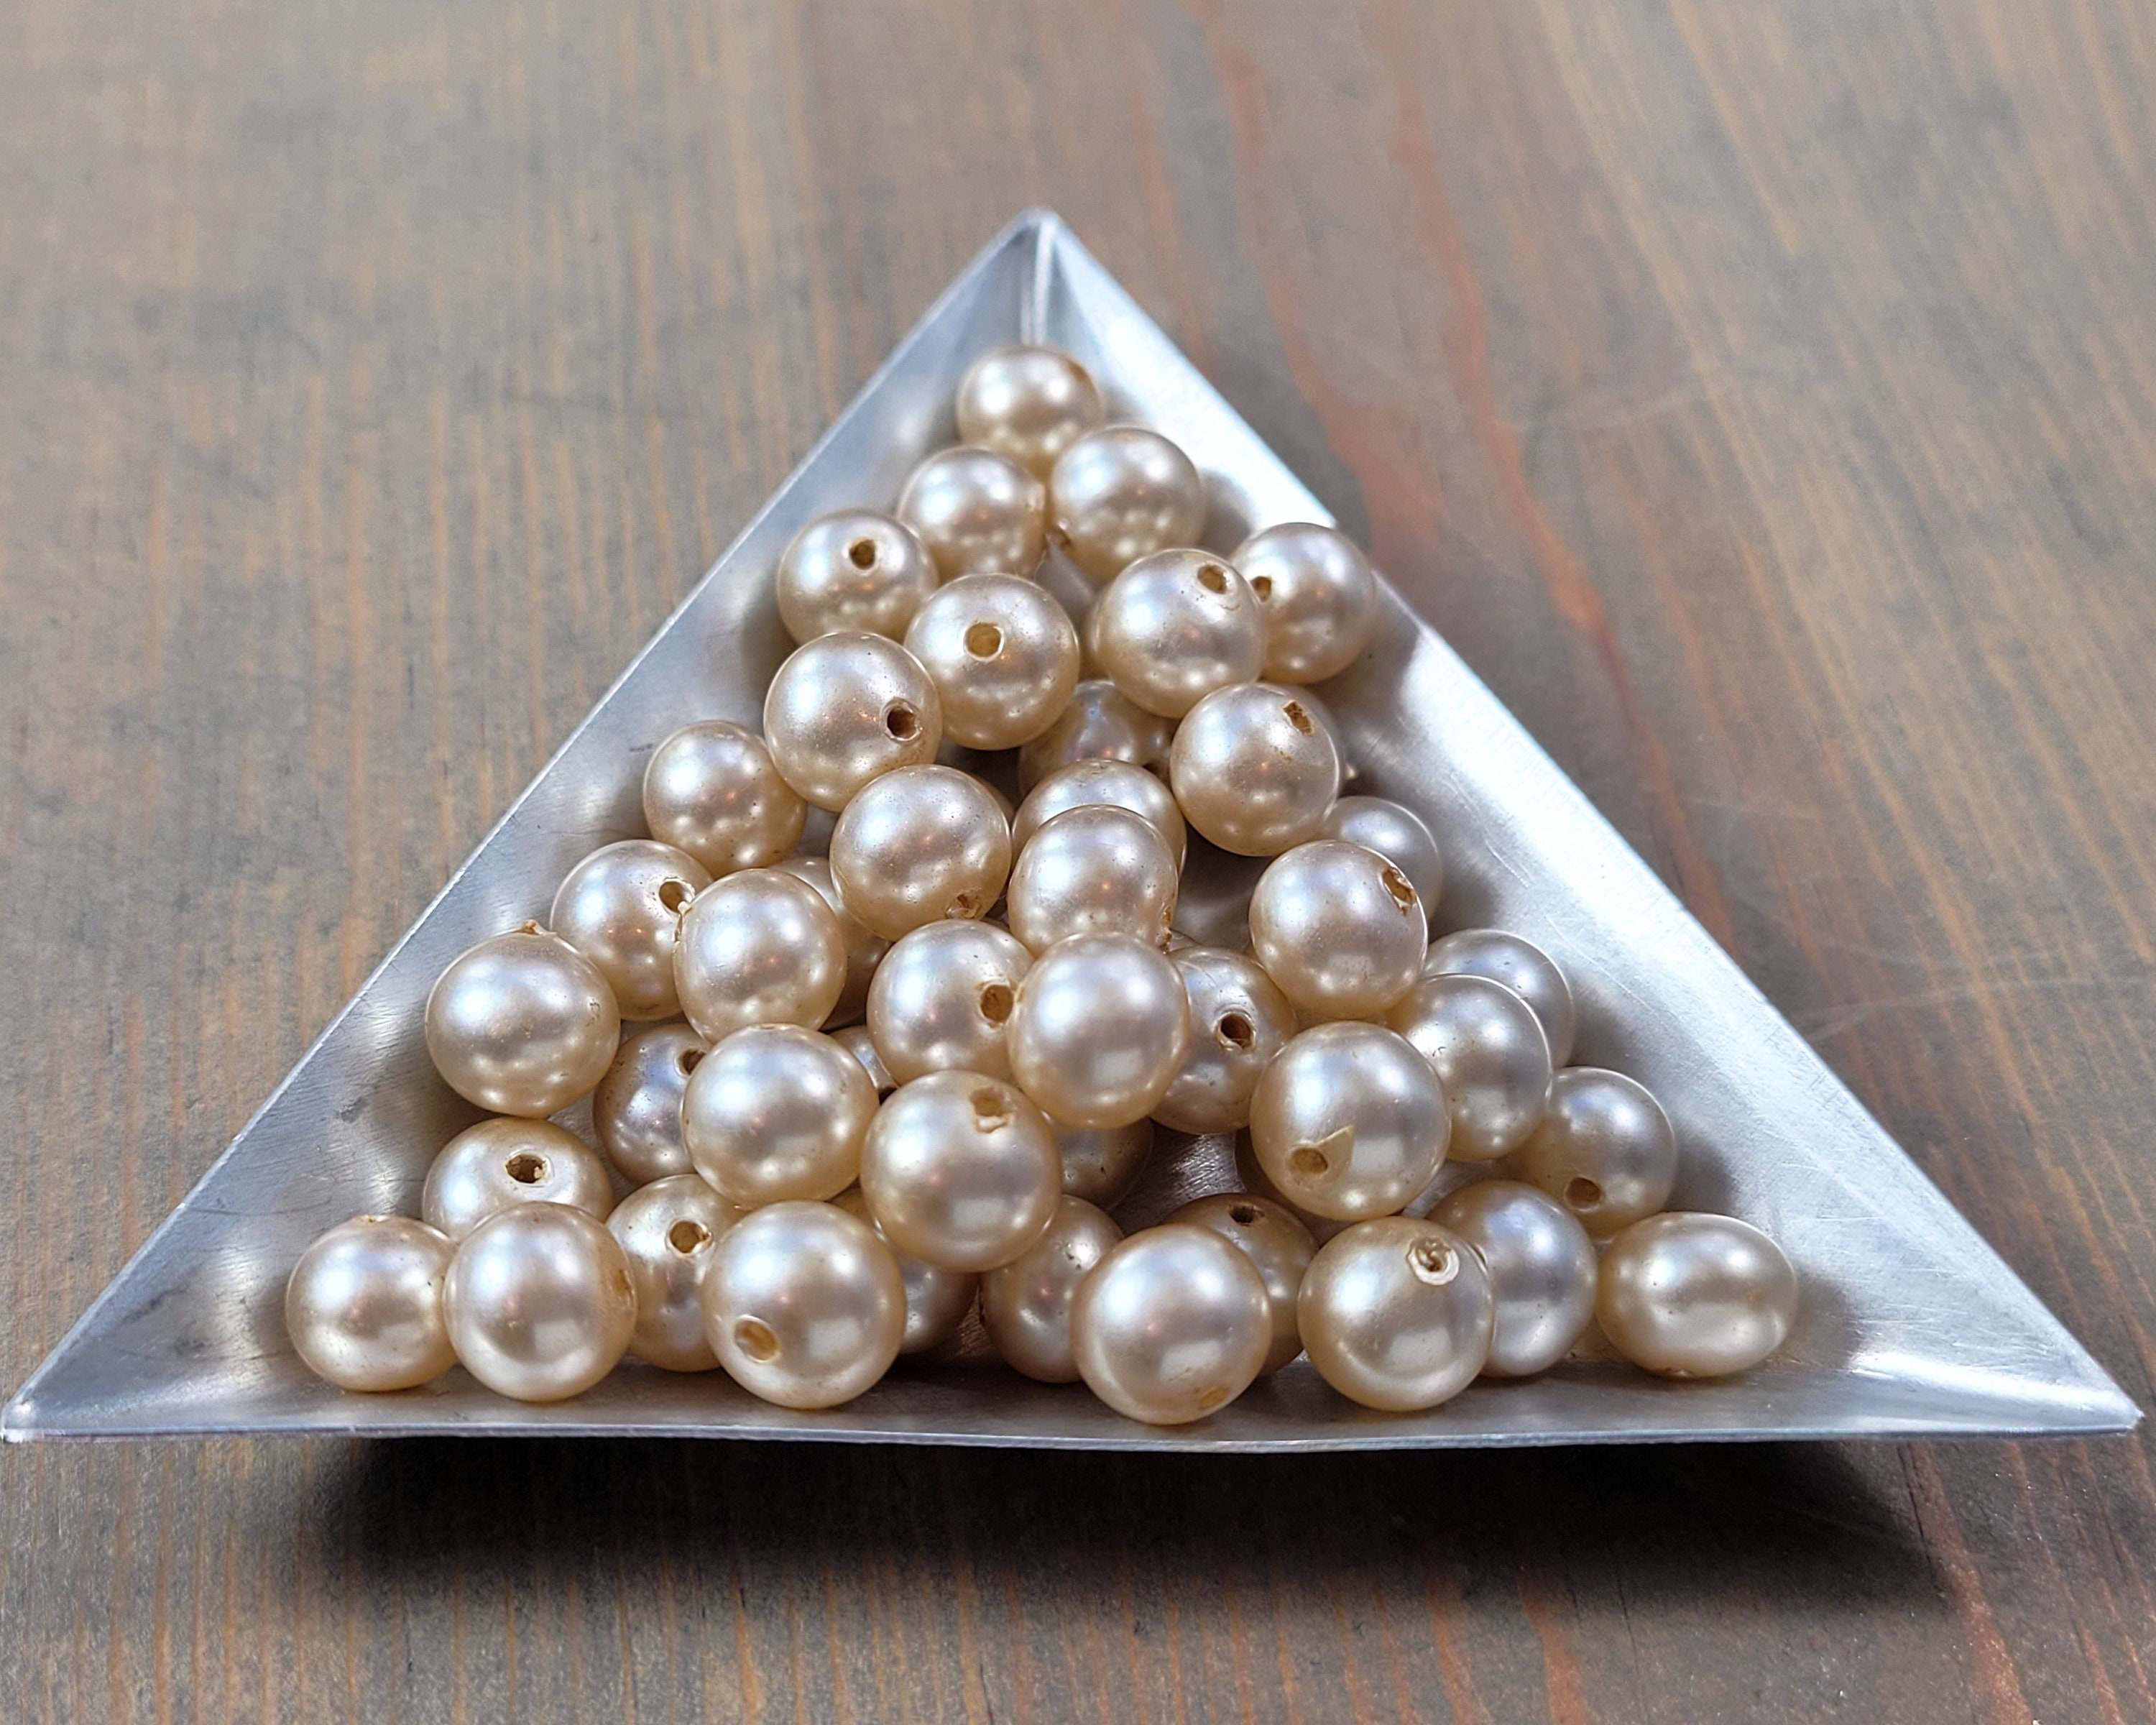 1/2 lb Vintage Faux Pearls for crafts And Art Projects. All Sizes.